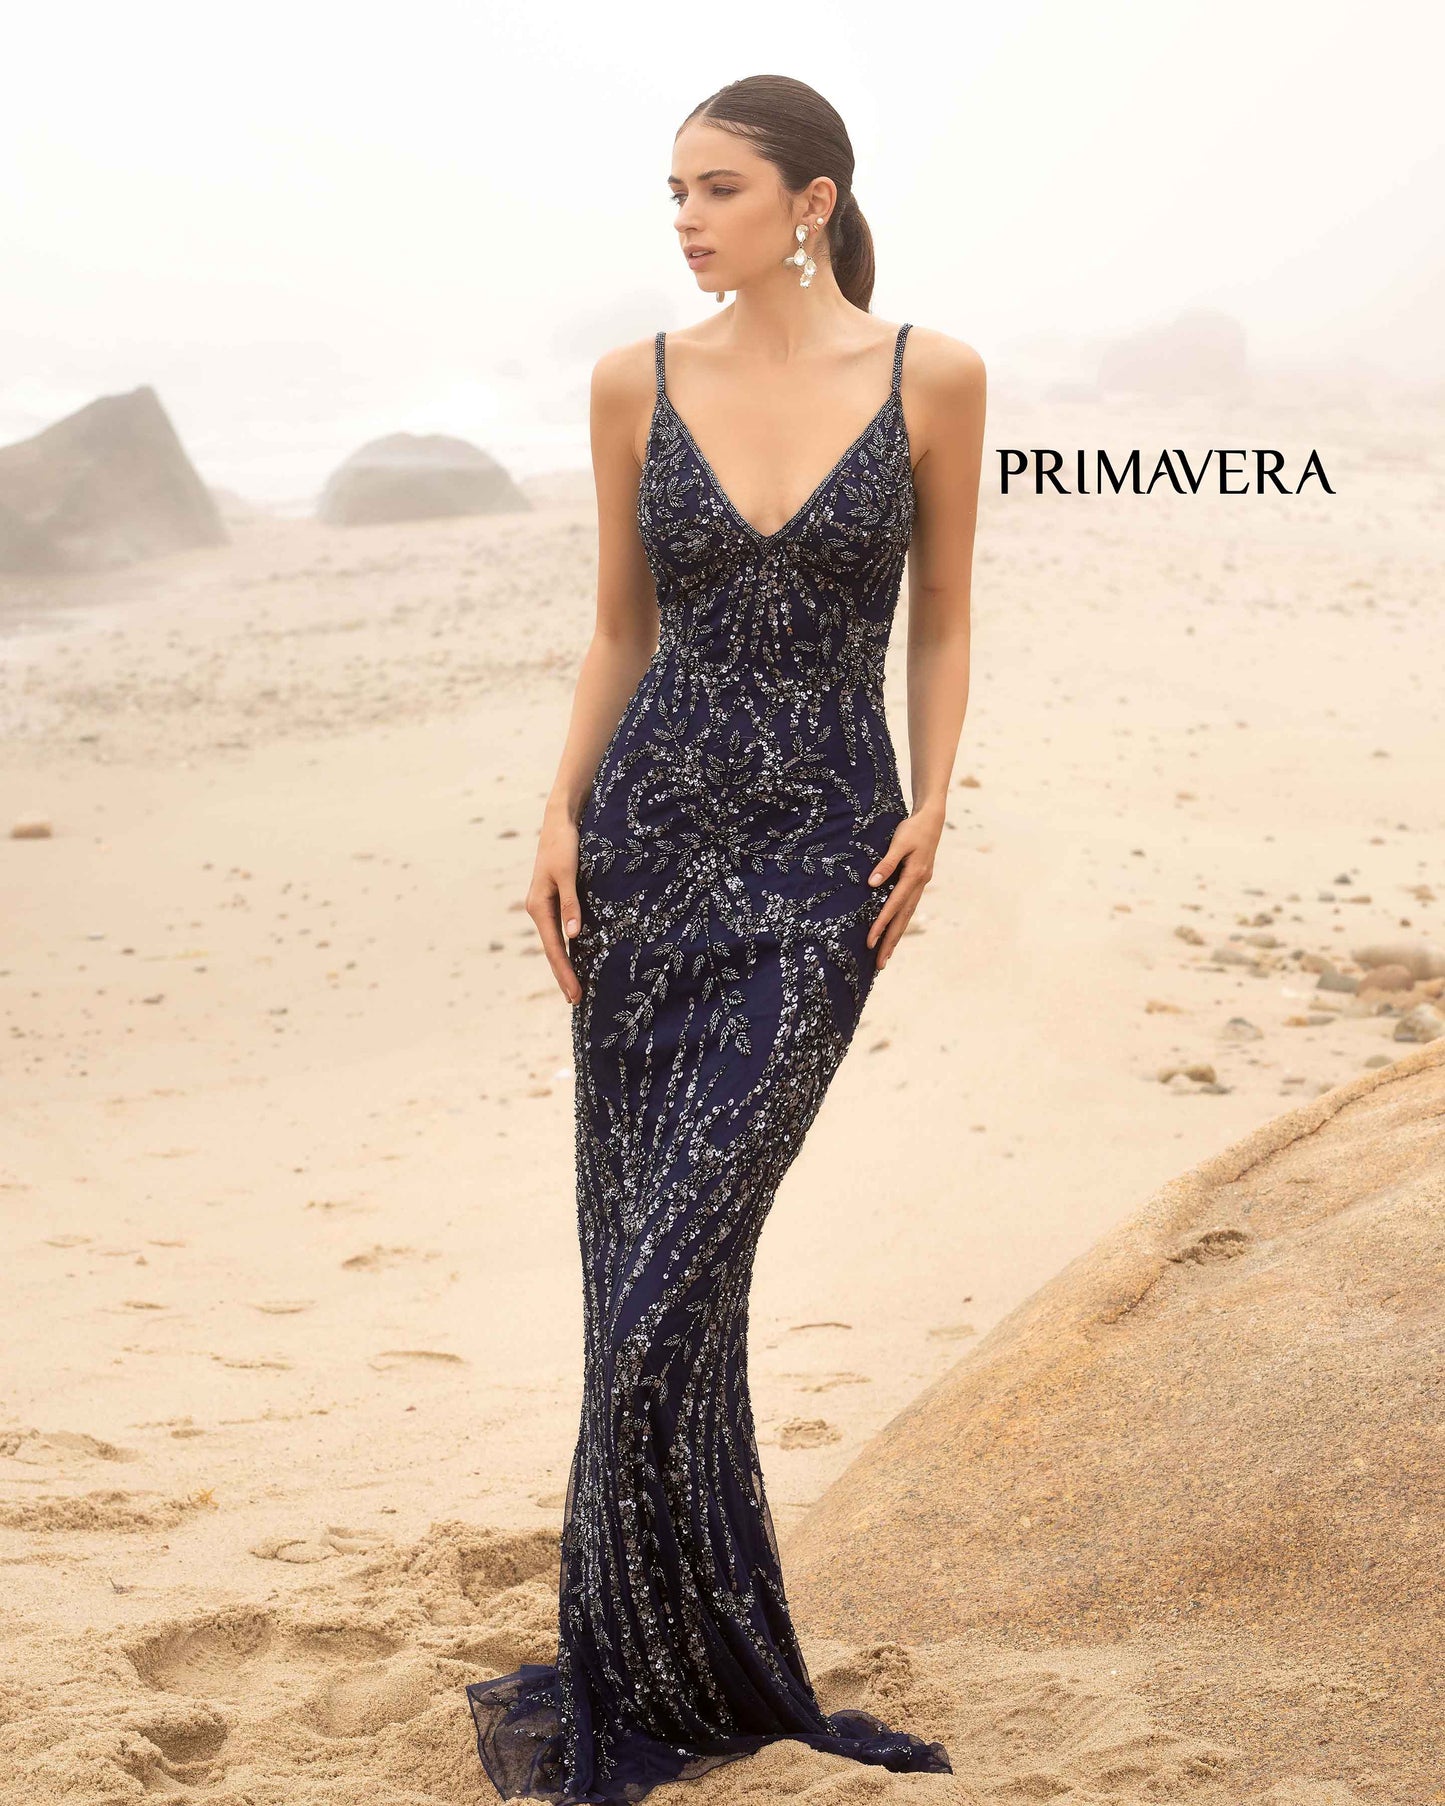 Primavera Couture 3793 This is a fully sequined long fitted Evening Gown with a V Neckline and a Sweeping Train.  This dress is an excellent choice for your special evening event such as prom or pageant.   Available colors:  PURPLE,NEON LILAC,BLACK,NEON CORAL,BRIGHT BLUE,IVORY,MIDNIGHT,ROSE,EMERALD,ROYAL BLUE,BLUE,RED,MINT,BABY PINK,NEON PINK,SAGE GREEN Available sizes:  000, 00, 0, 2, 4, 6, 8, 10, 12, 14, 16, 18